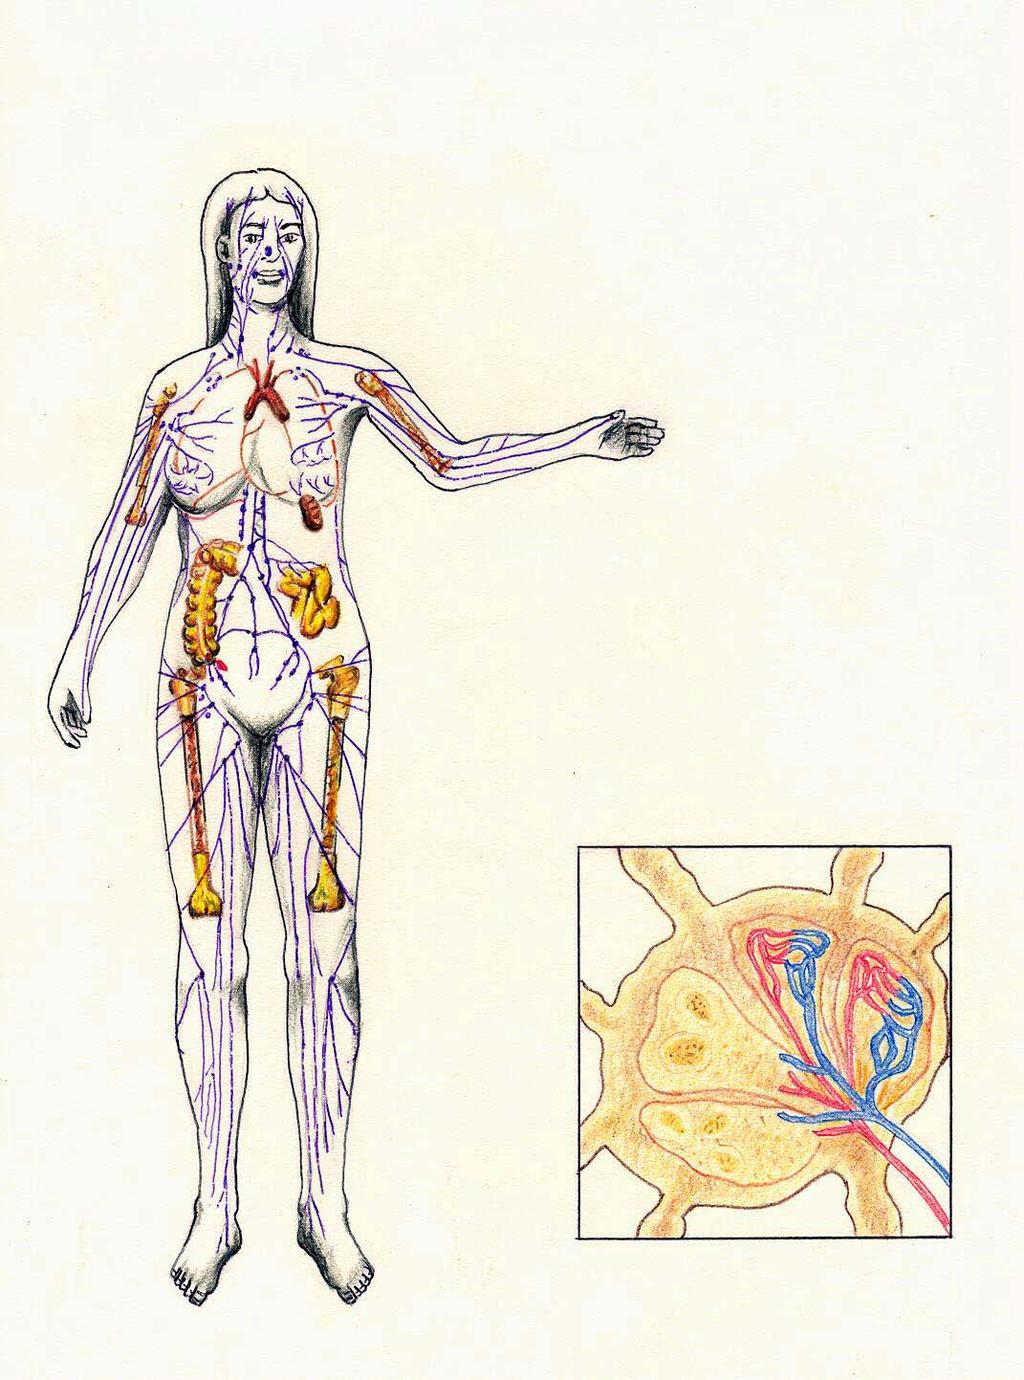 THE LYMPH SYSTEM IS A DECENTRALIZED IMMUNITY DEFENSE The lymph system consists of many organs and tissues that are scattered throughout the body, providing lymphocytes that are responsible for